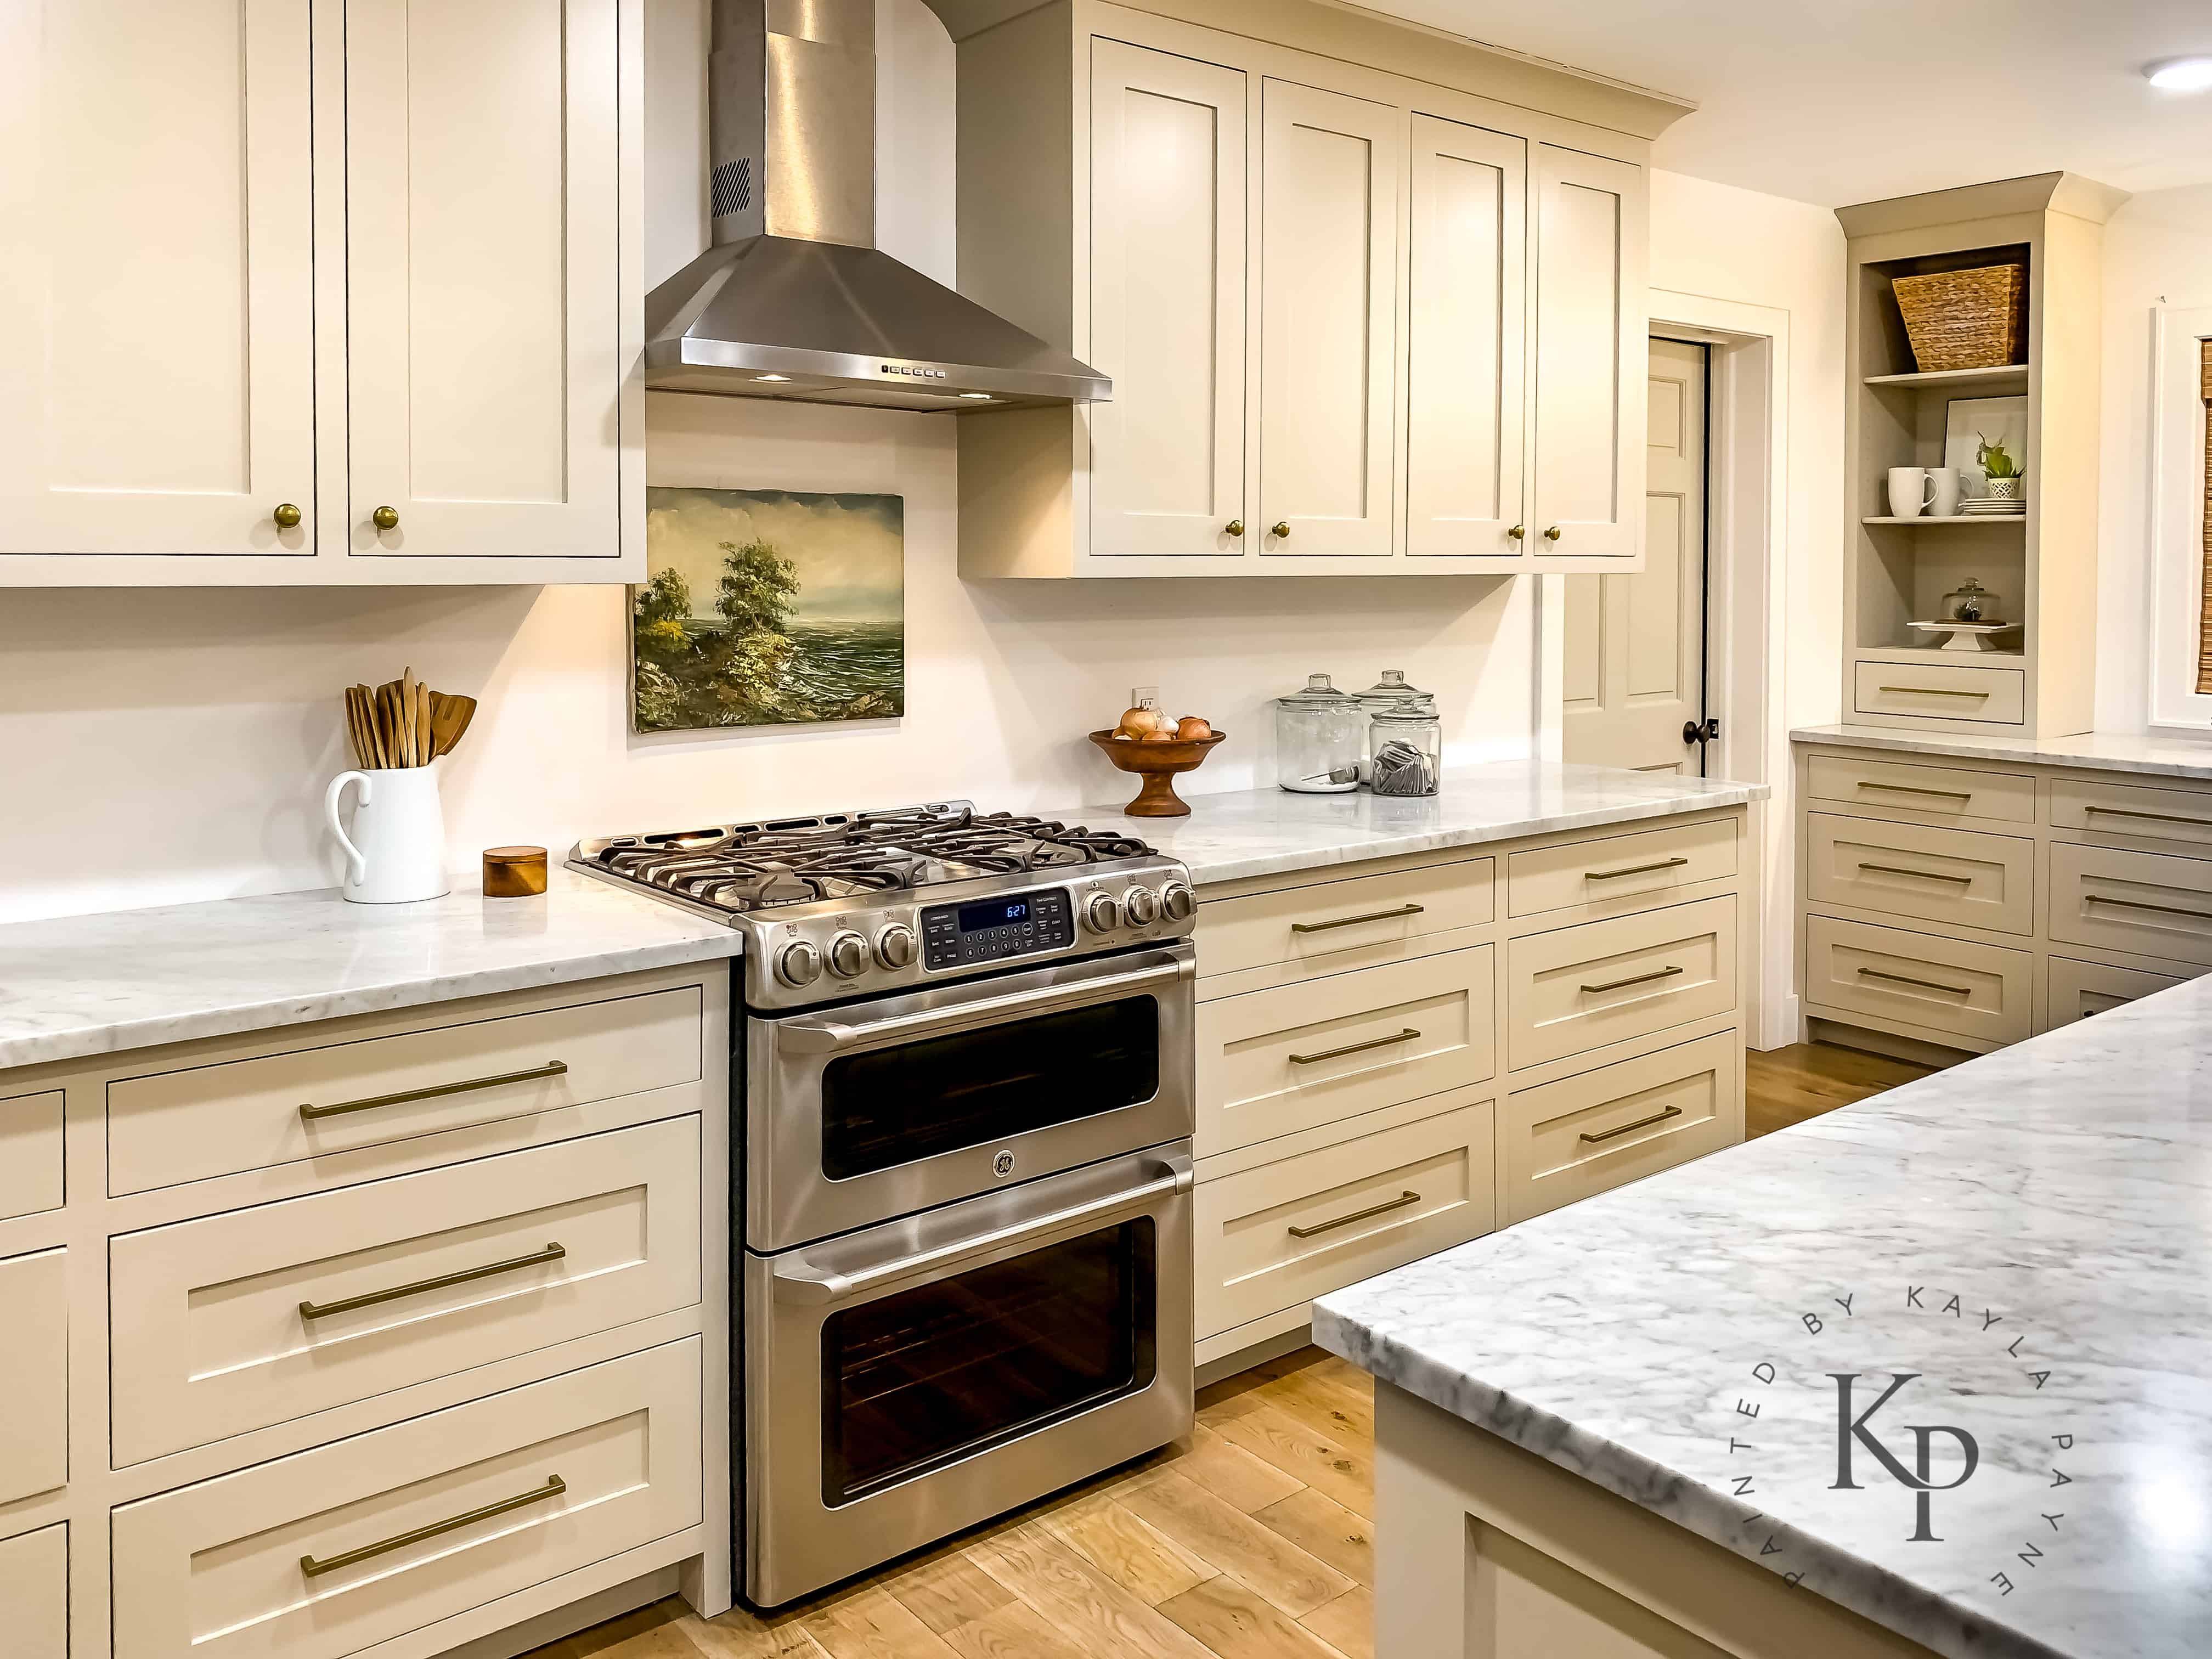 Revere Pewter Kitchen cabinets with brass hardware